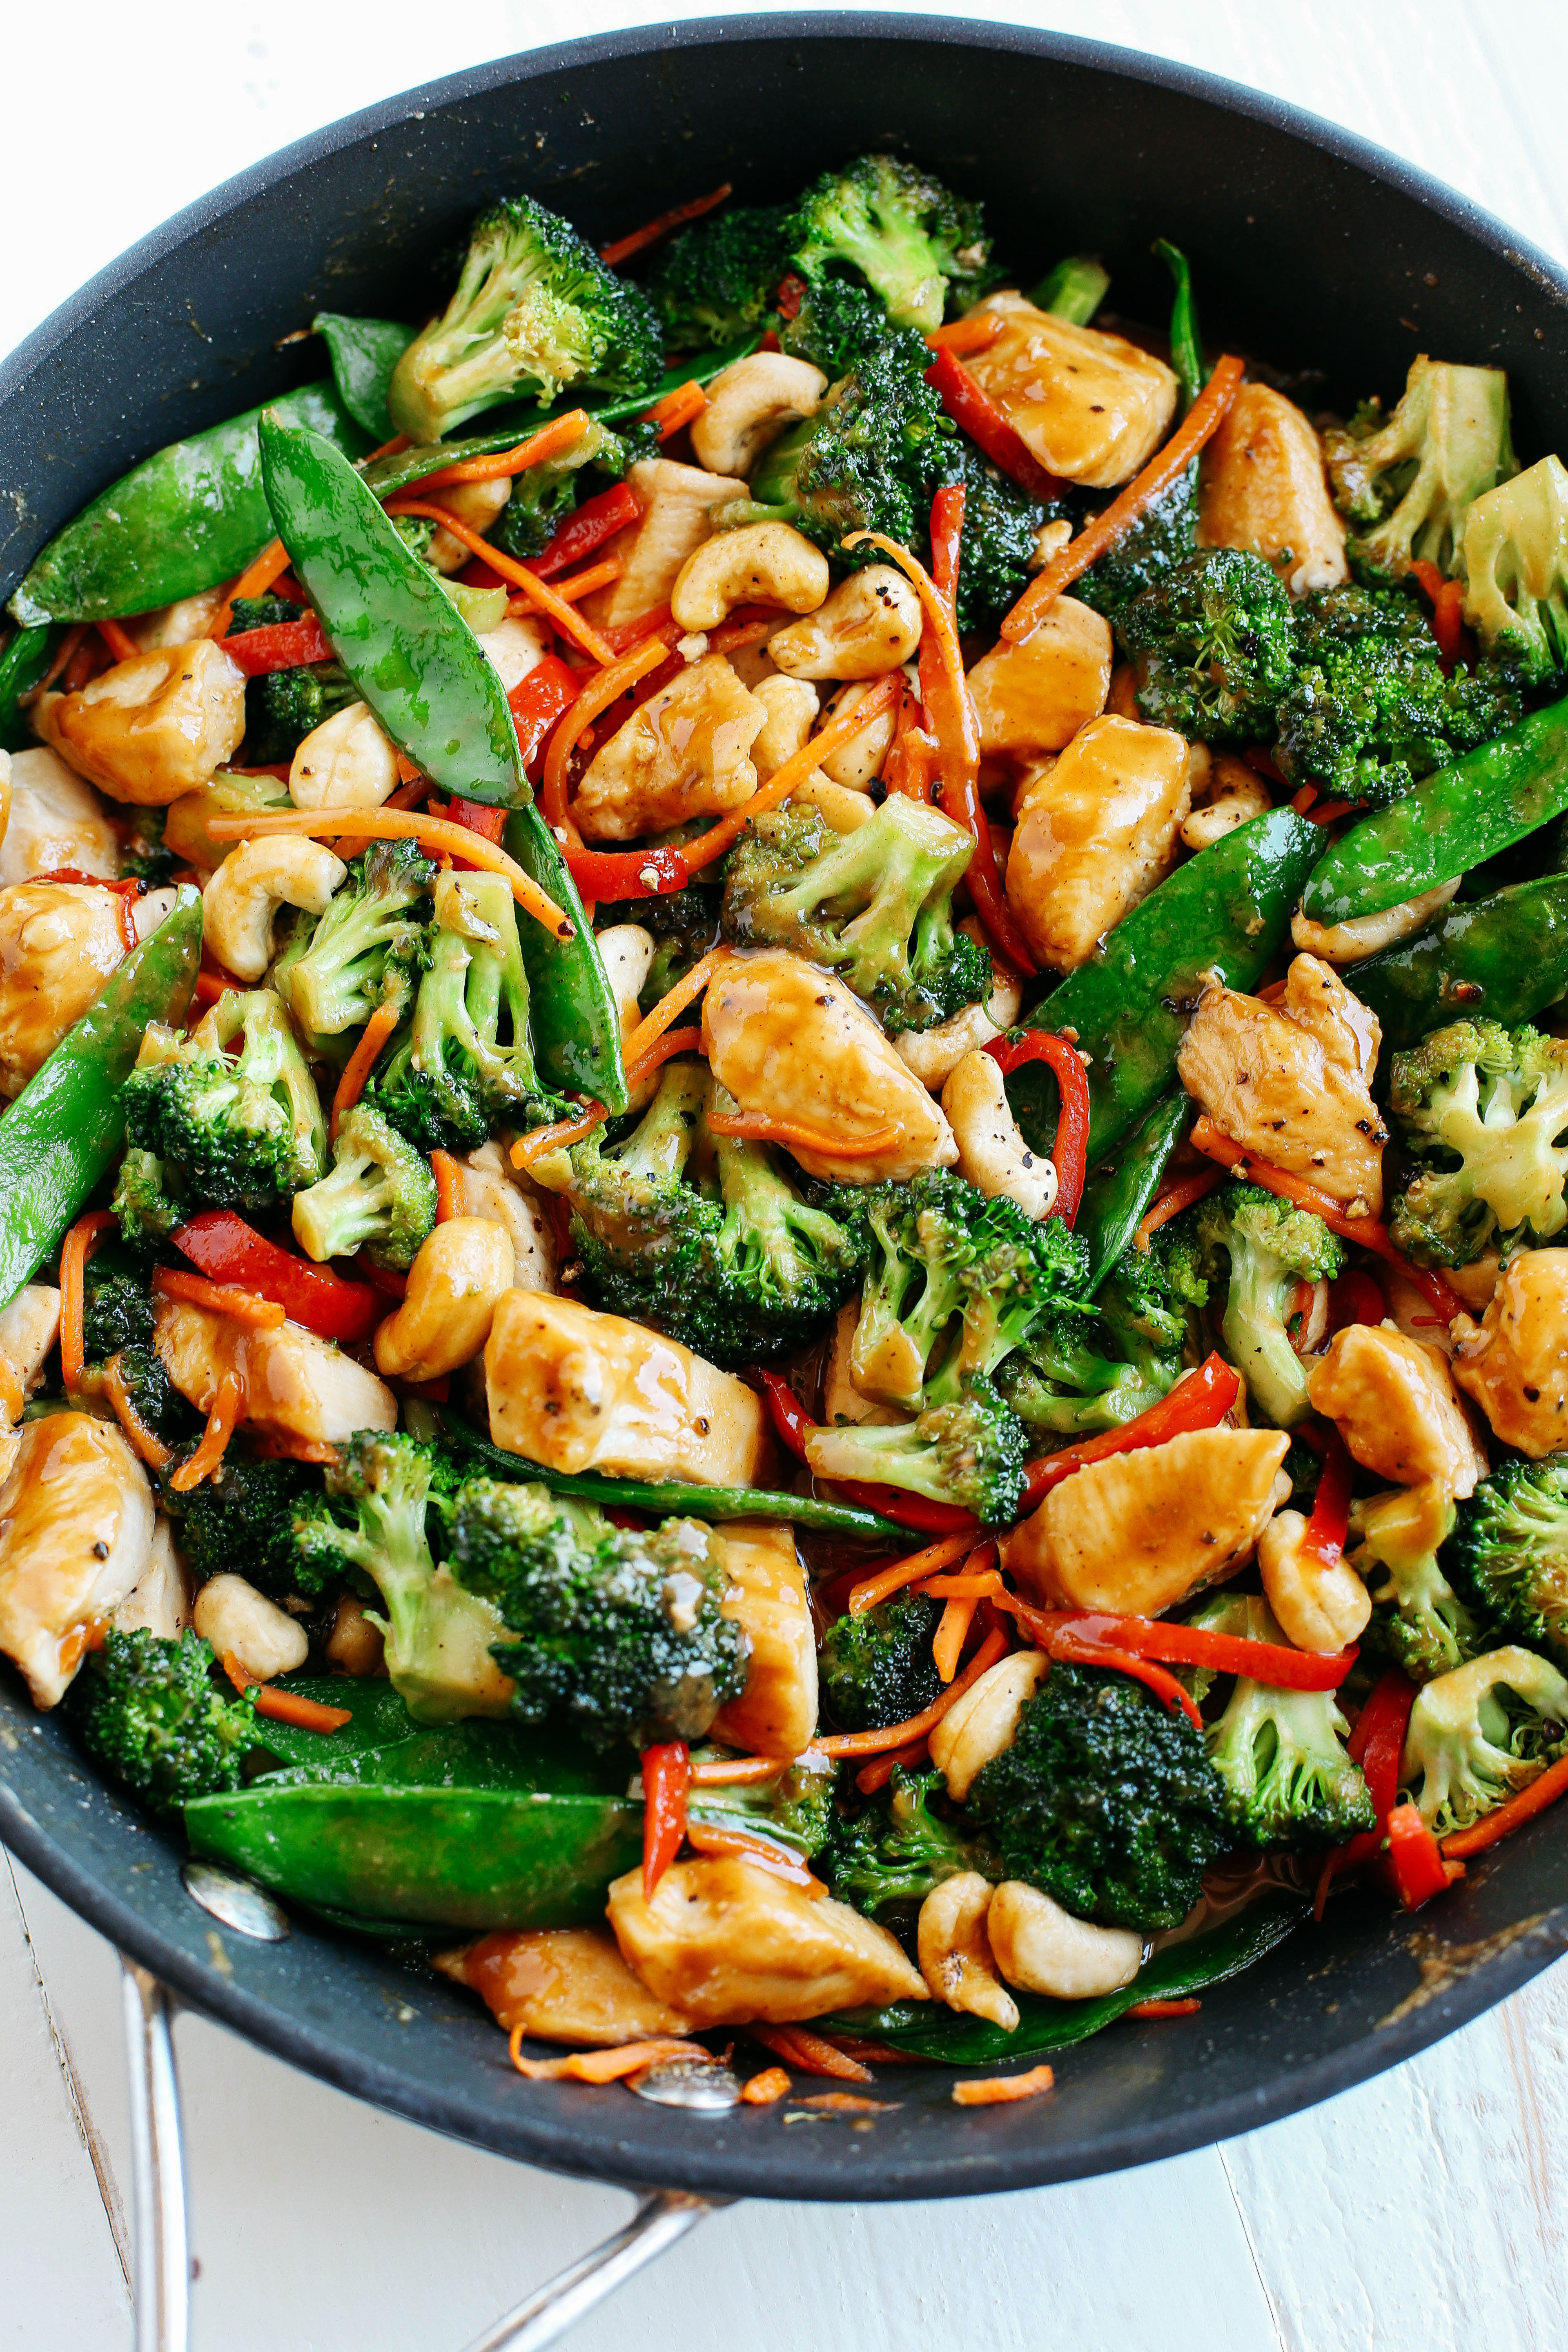 This EASY 20 minute One Skillet Cashew Chicken Stir Fry is the perfect weeknight meal that is healthy, full of flavor and perfect for your weekly meal prep!